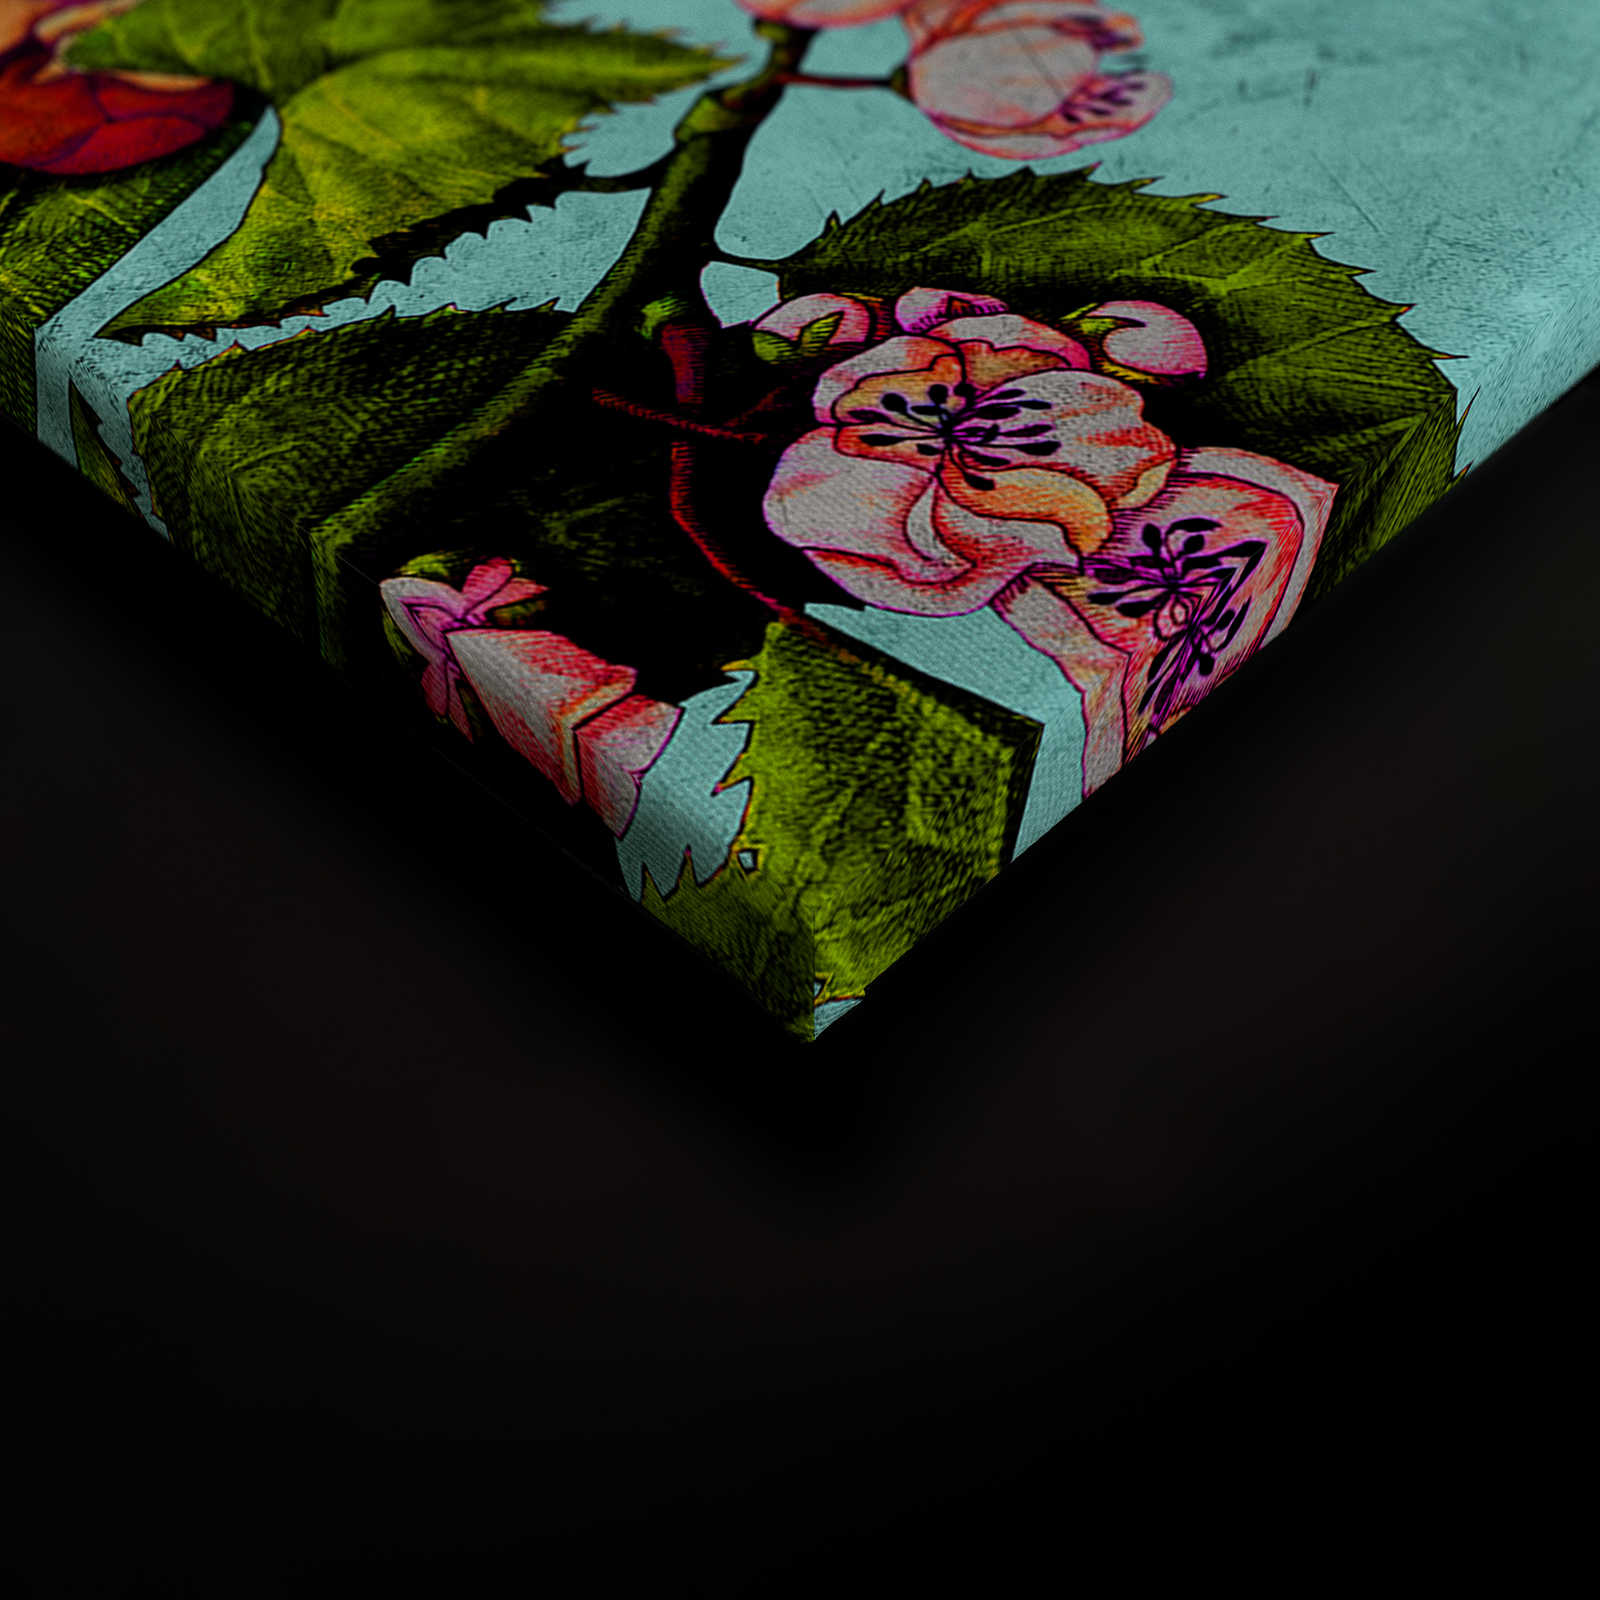             Tropical Passion 1 - Tropical Canvas Painting with Floral Pattern - 0.90 m x 0.60 m
        